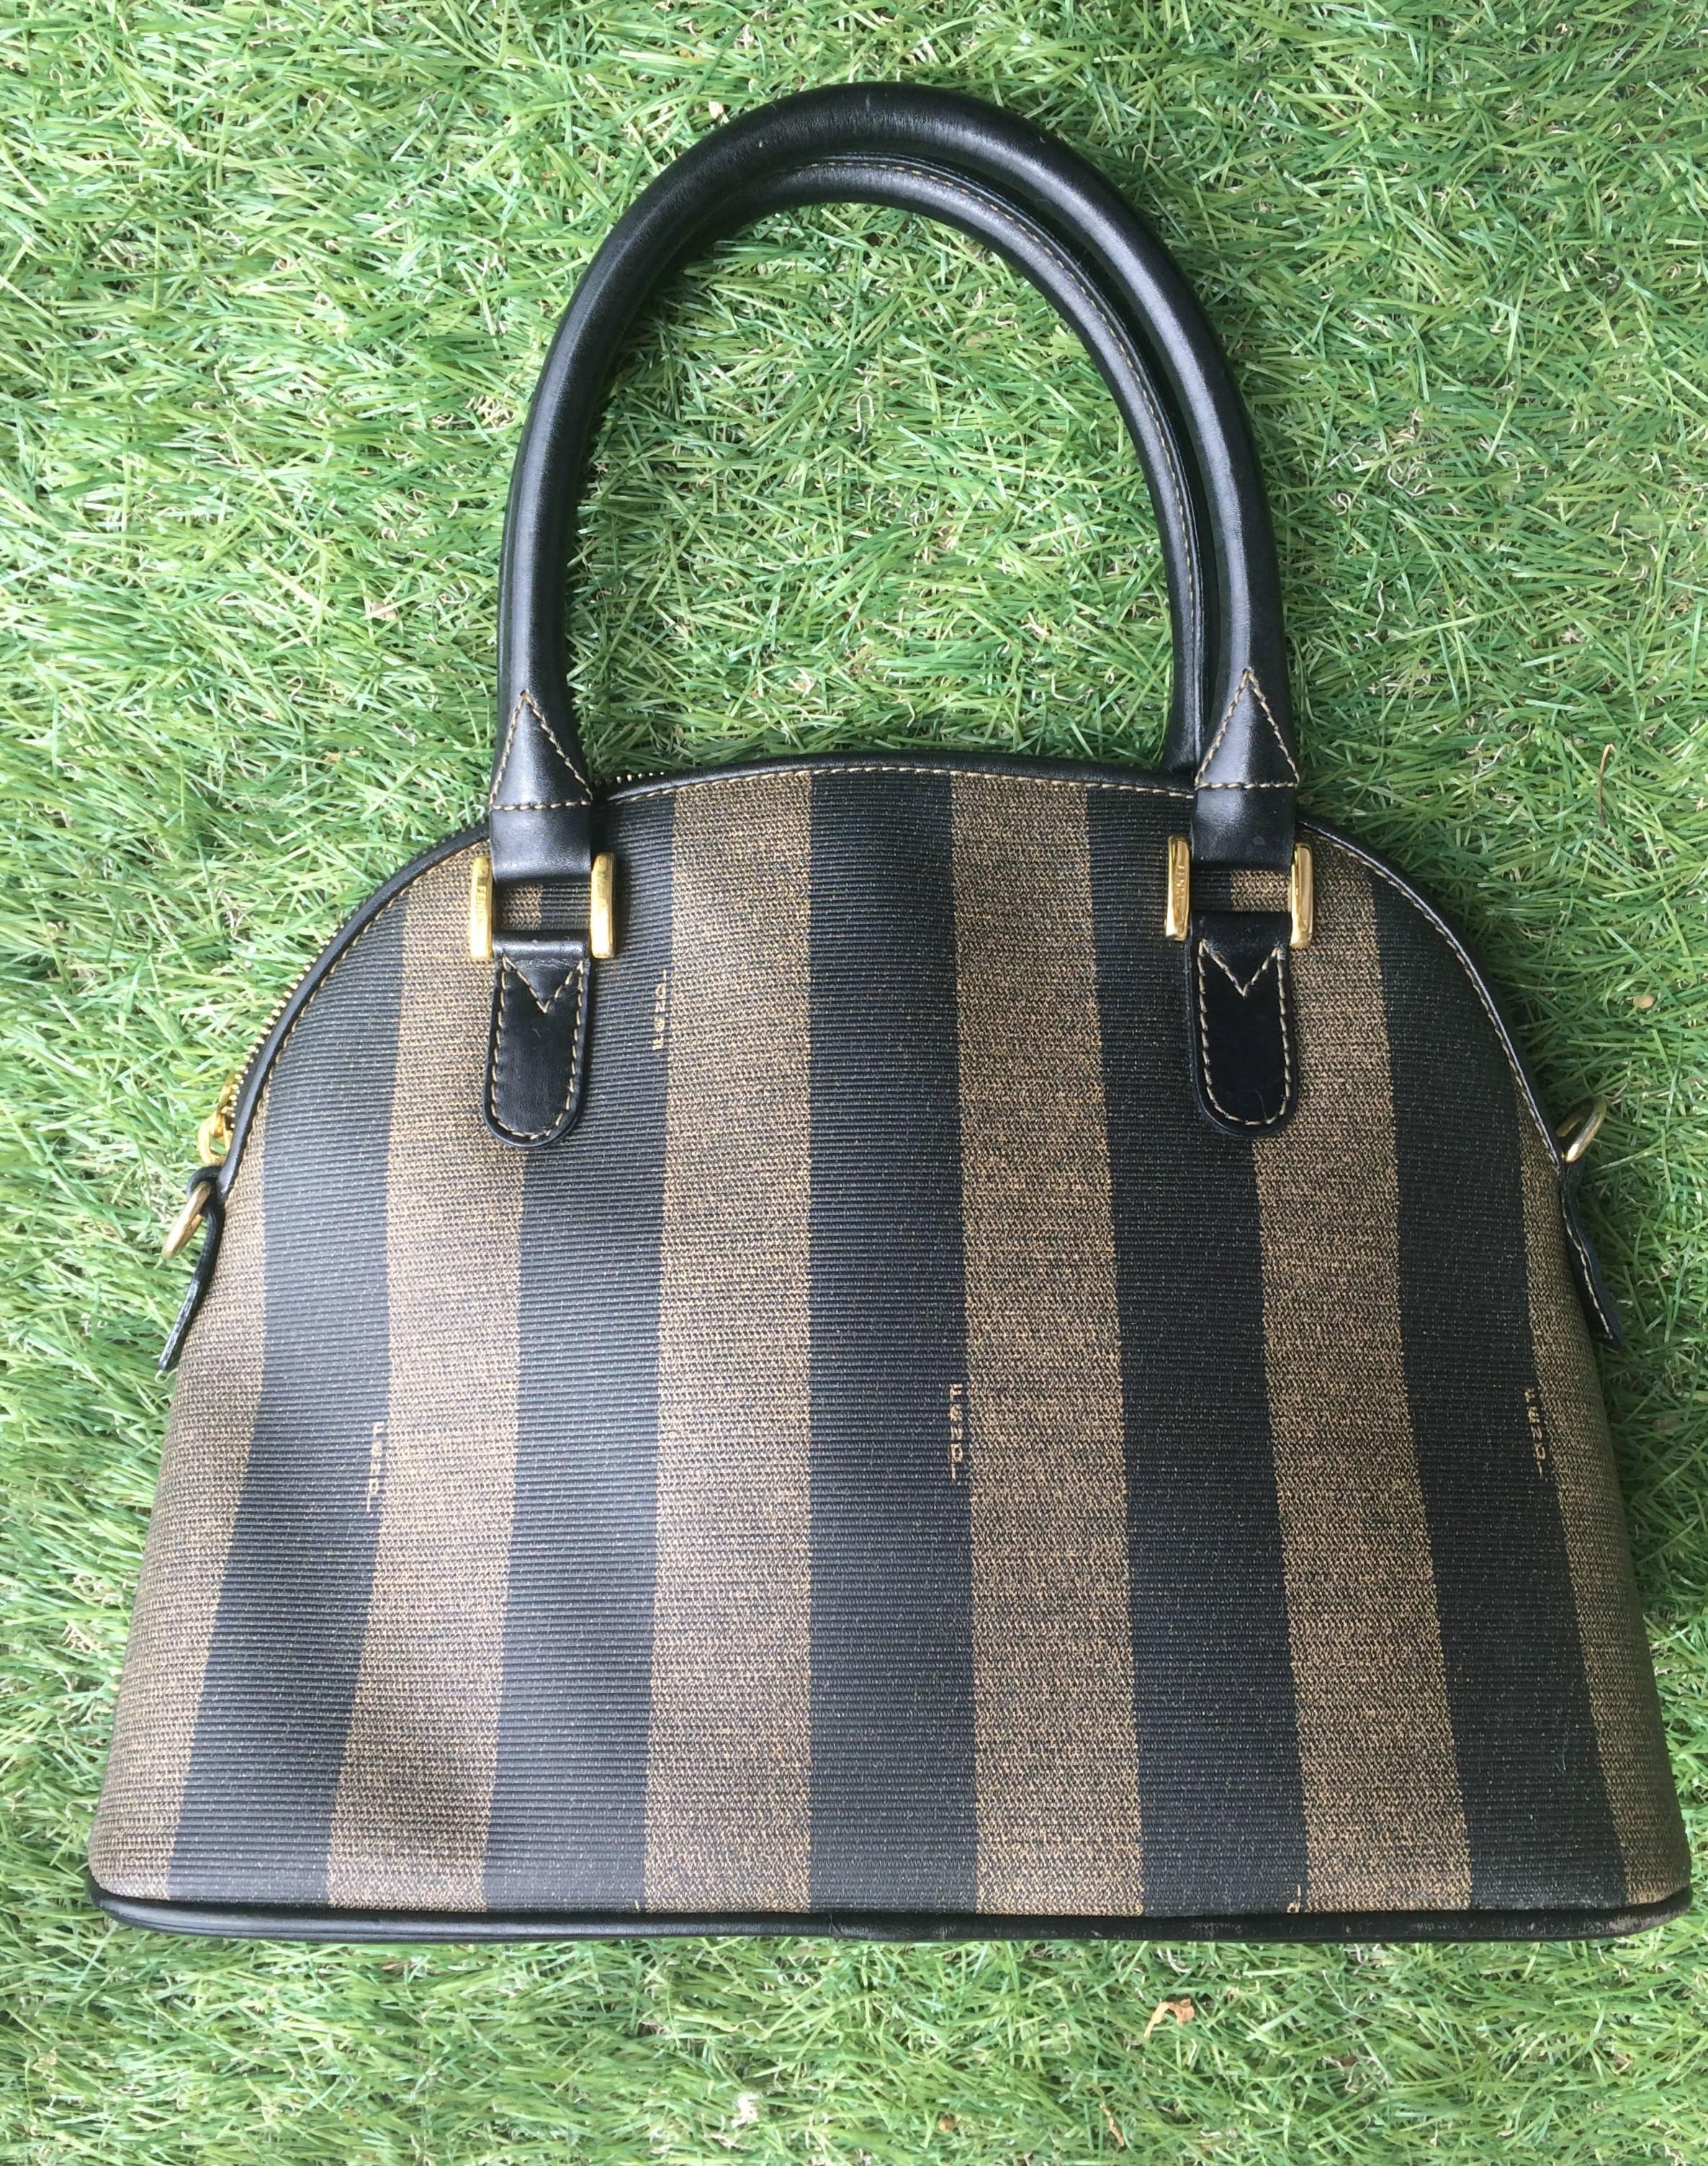 1990s. Vintage FENDI classic black and grey pecan vertical stripe bolide shape handbag with leather handles. Classic bag for daily use.

This is a FENDI conic pecan pattern purse in bolide shape from the early 90's. 
Very classic and yet